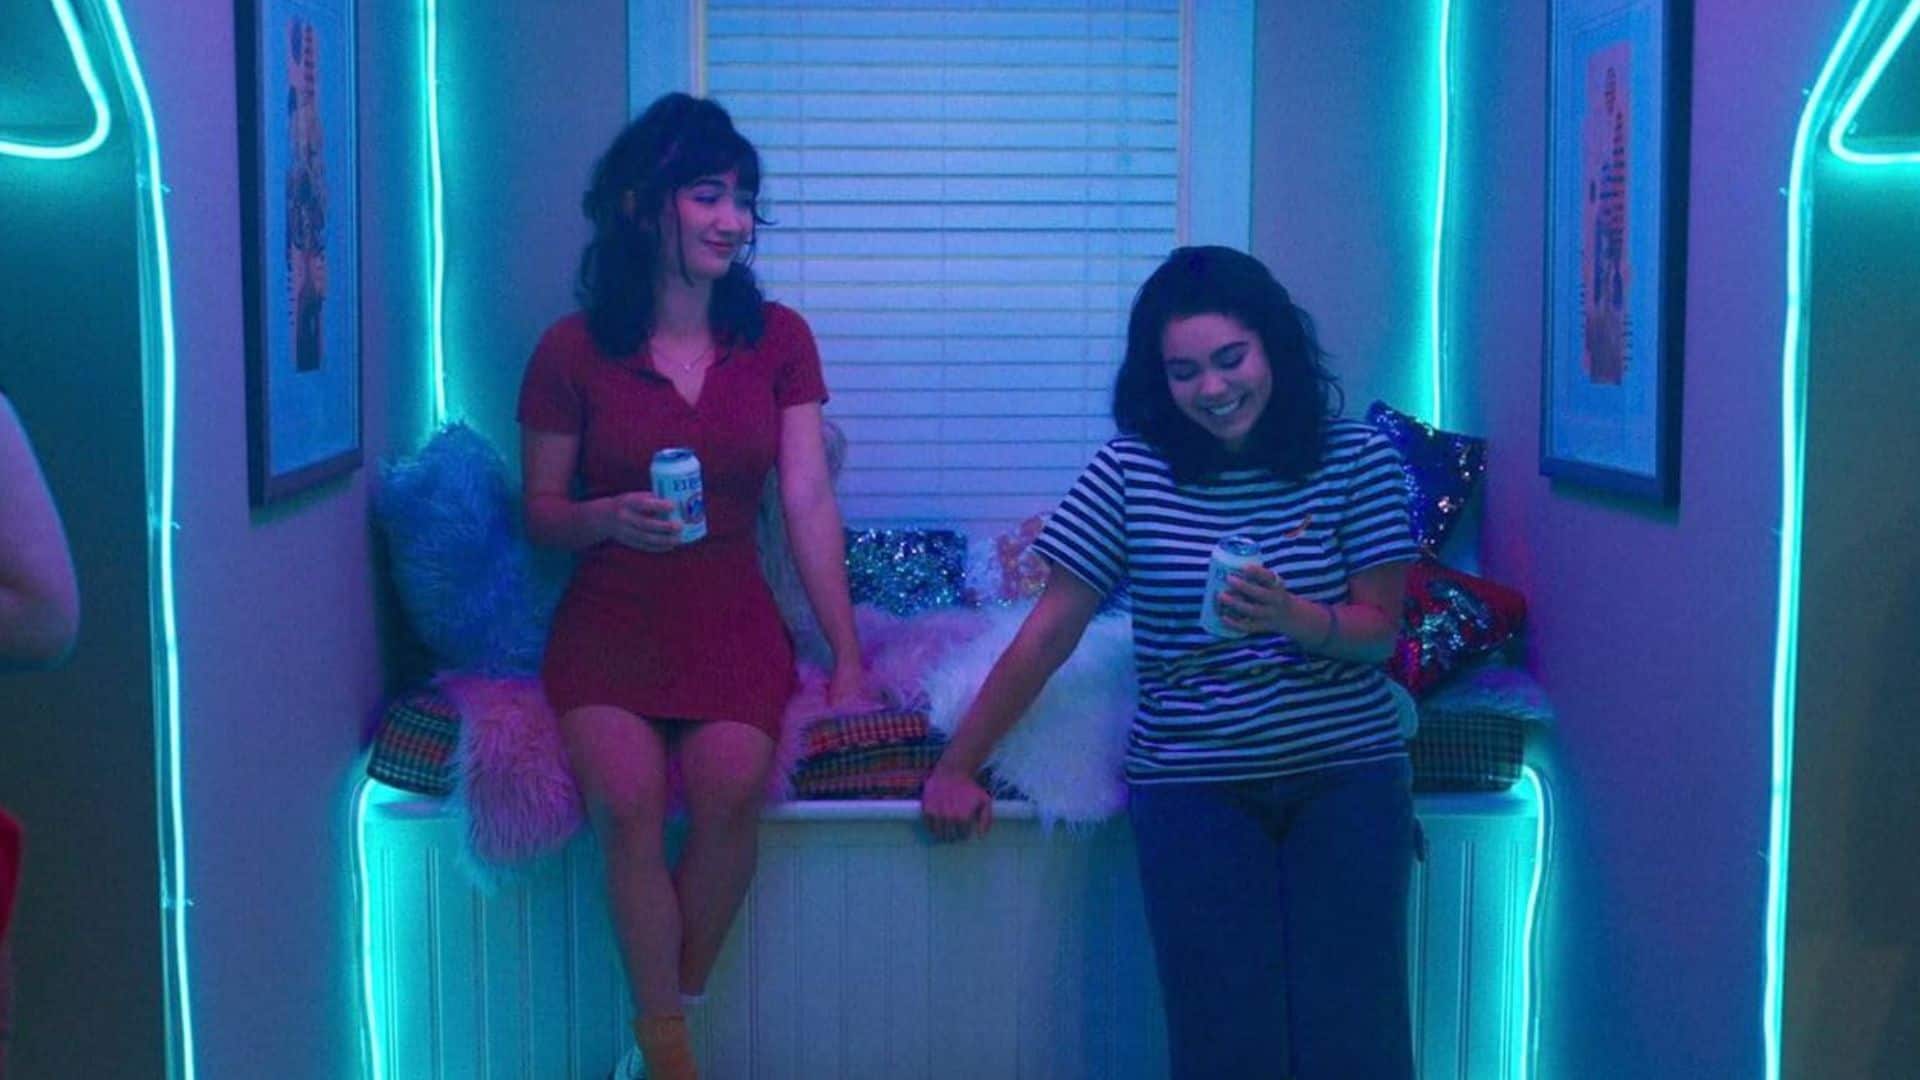 Two young women holding beers in a room with neon lights in this image from Animal Pictures.